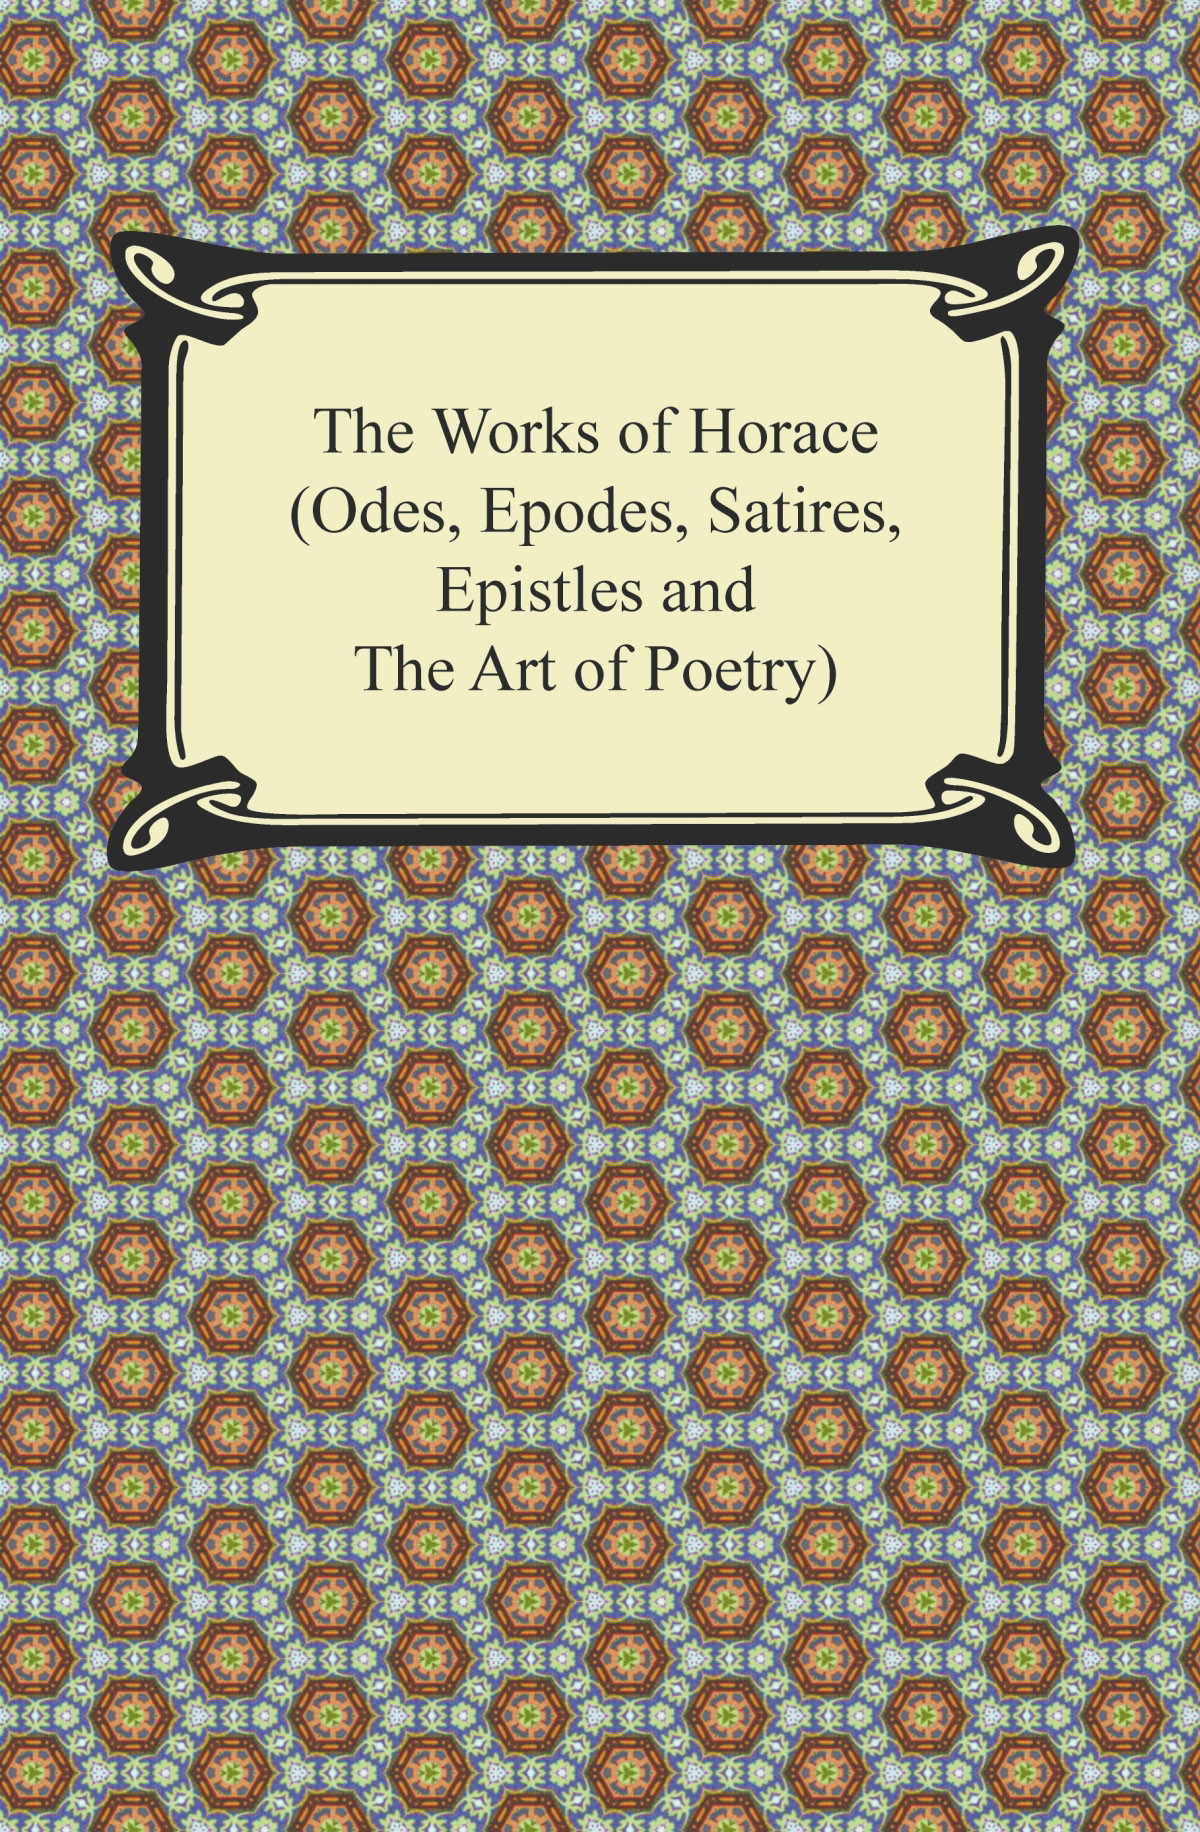 The Works of Horace (Odes, Epodes, Satires, Epistles and The Art of Poetry) - <5